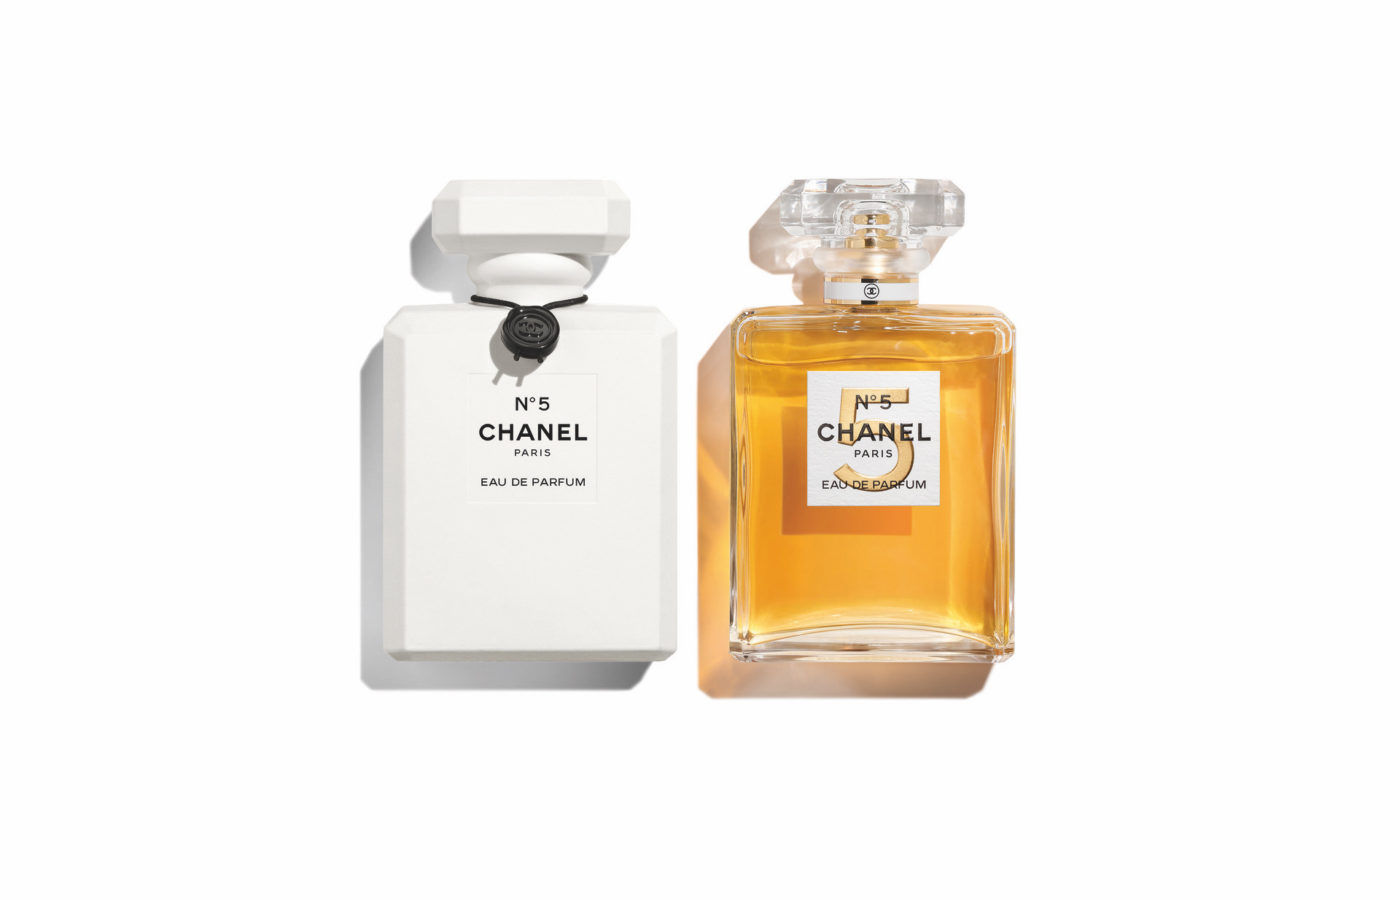 CELEBRATION OF THE HUNDRED YEARS OF CHANEL N°5 PERFUME